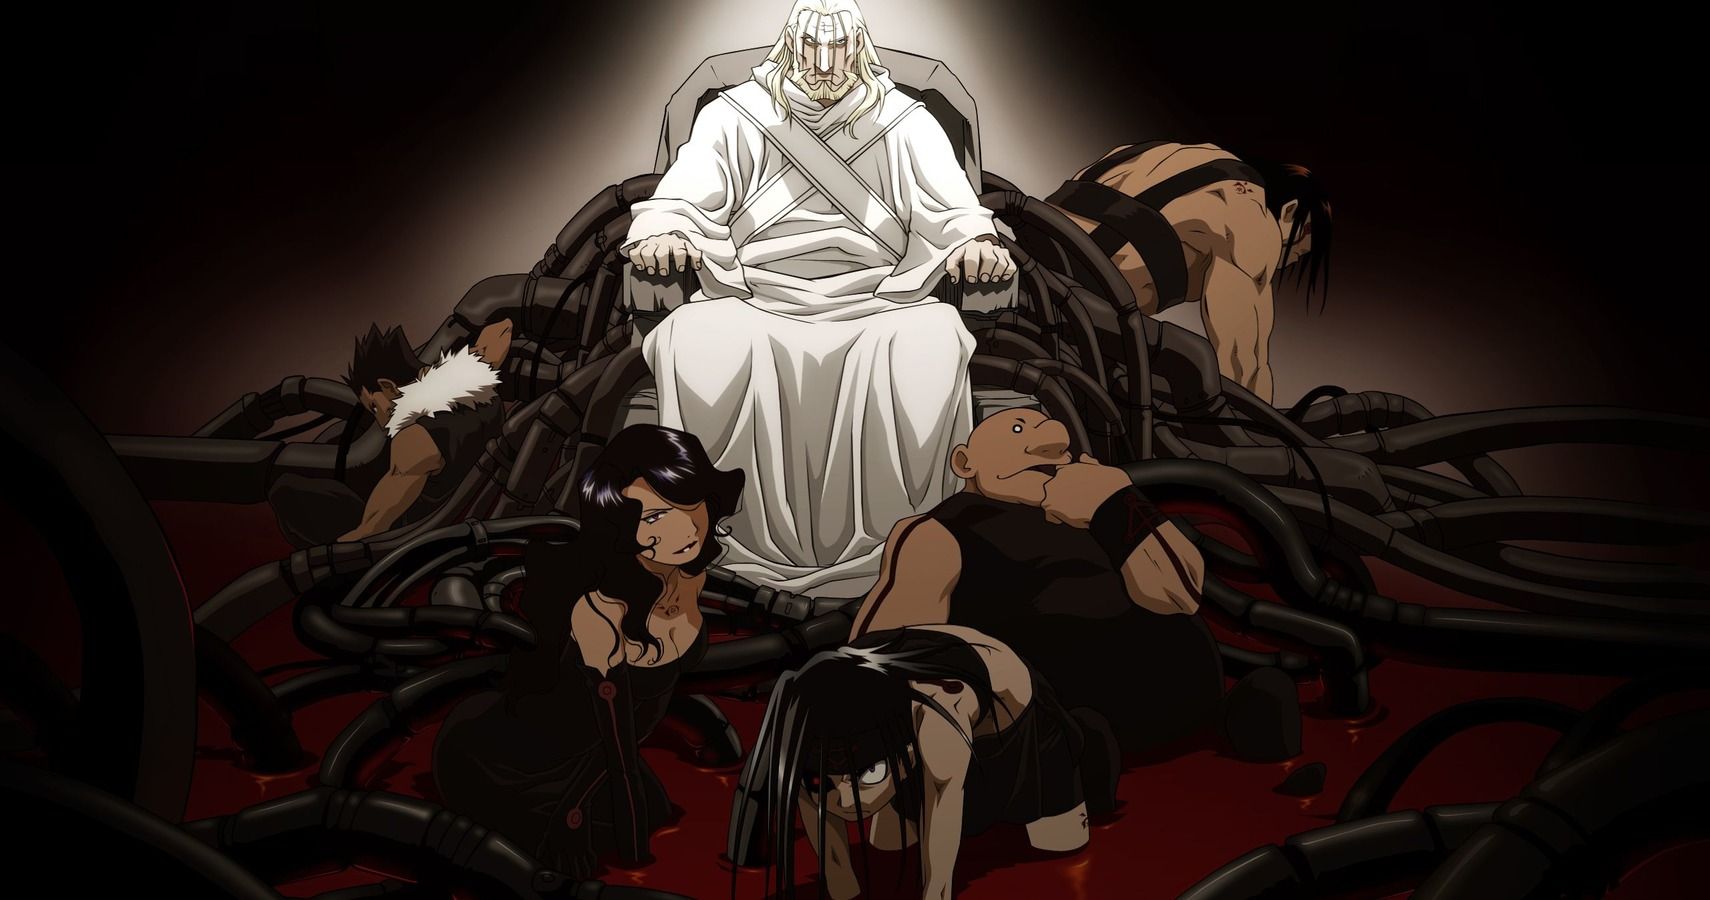 The homunculi and Father from the Fullmetal Alchemist: Brotherhood anime